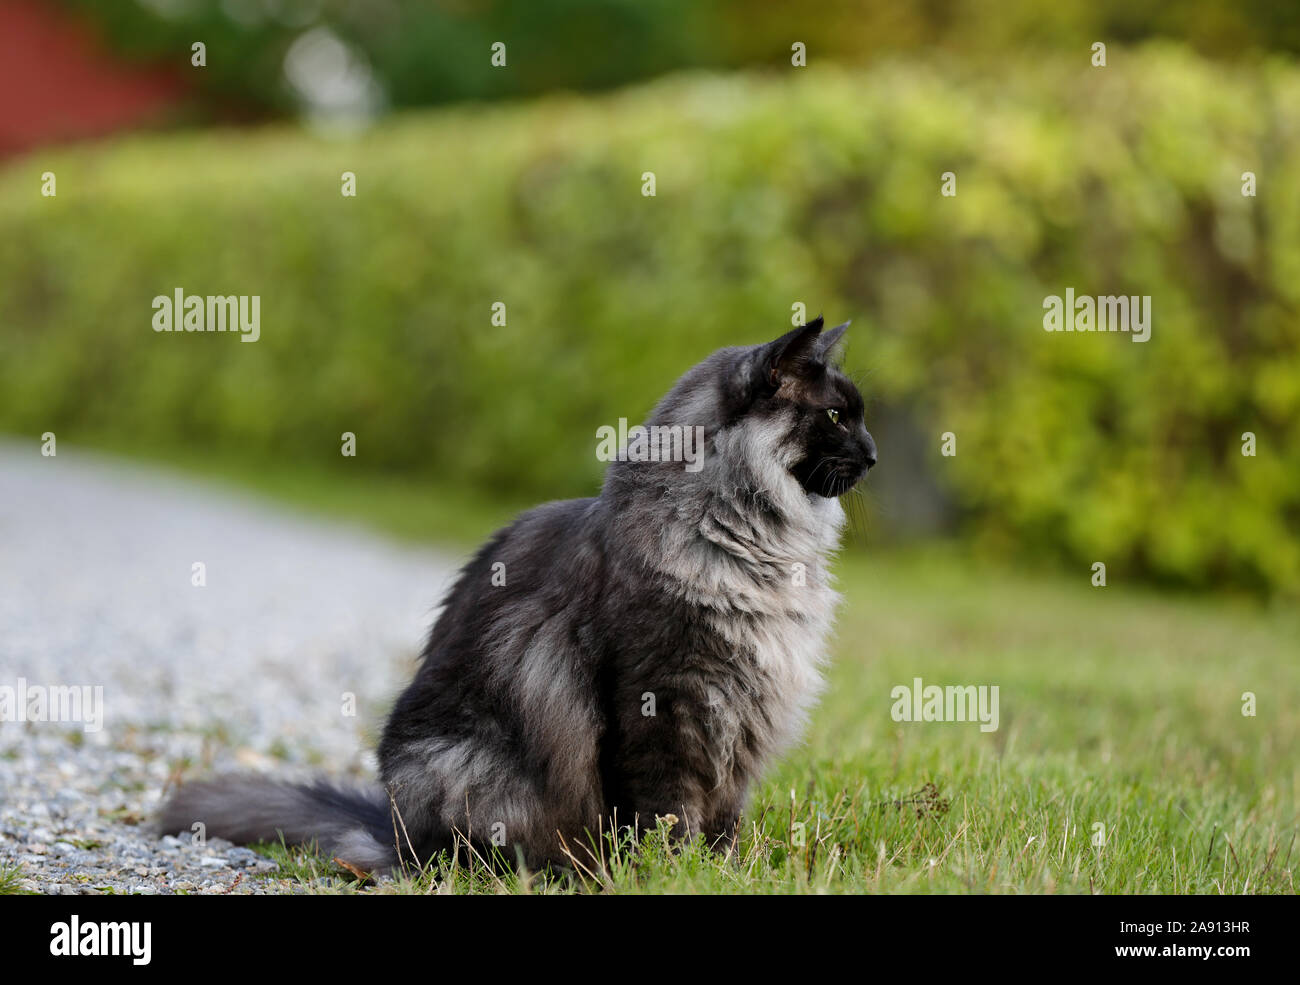 A norwegian forest cat male sitting outdoors Stock Photo